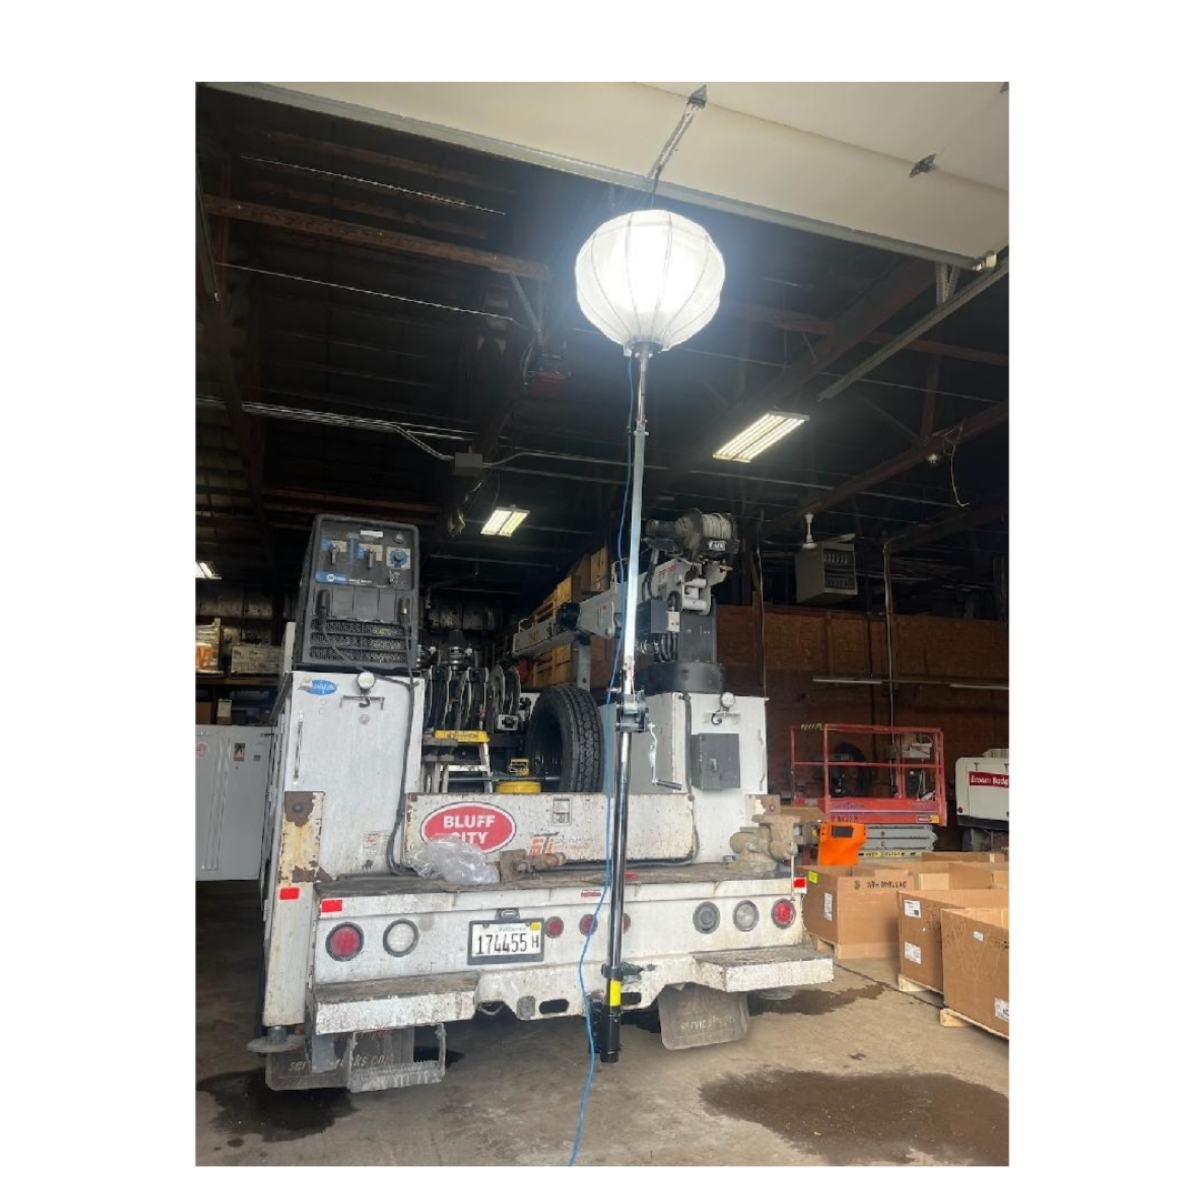 Portable Lighting Truck Mount_Portable Lighting Solutions_Quarry_Chicago Construction_Night Construction_Balloon Lighting_Bluff City_Construction Lighting_Truck Lighting